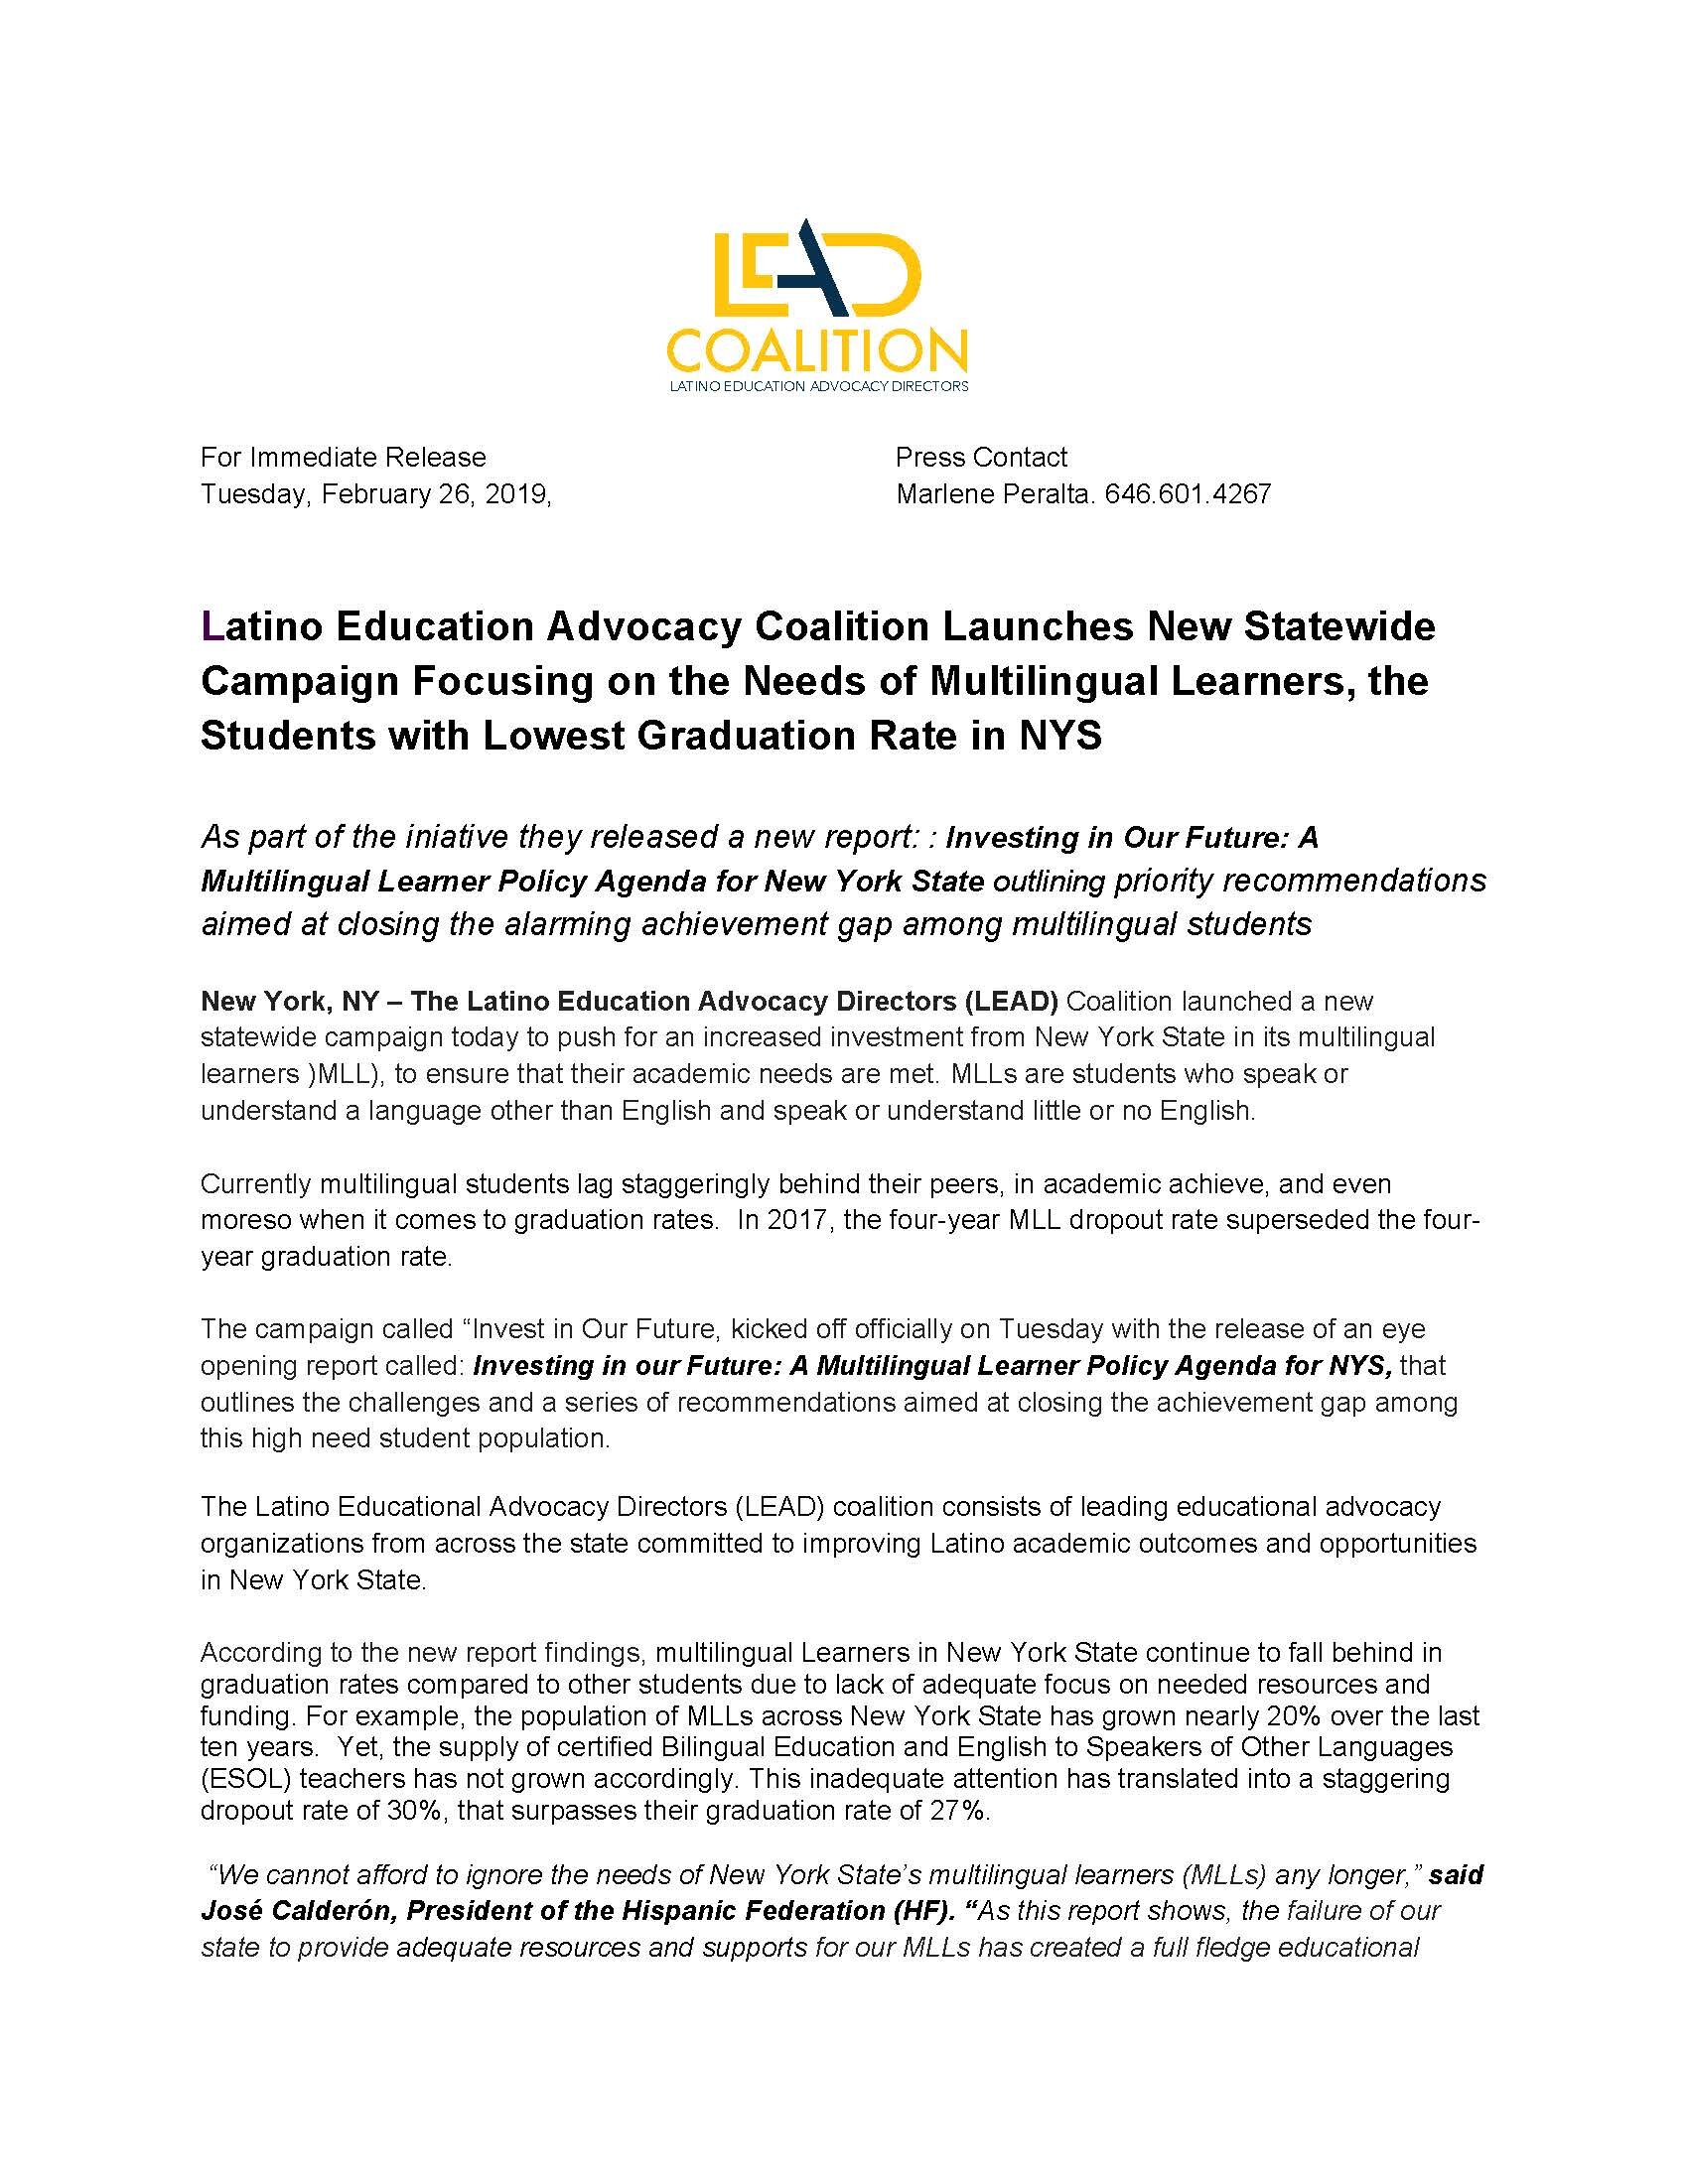 Latino Education Advocacy Coalition Launches New Statewide Campaign Focusing on the Needs of Multilingual Learners, the Students with Lowest Graduation Rate in NYS